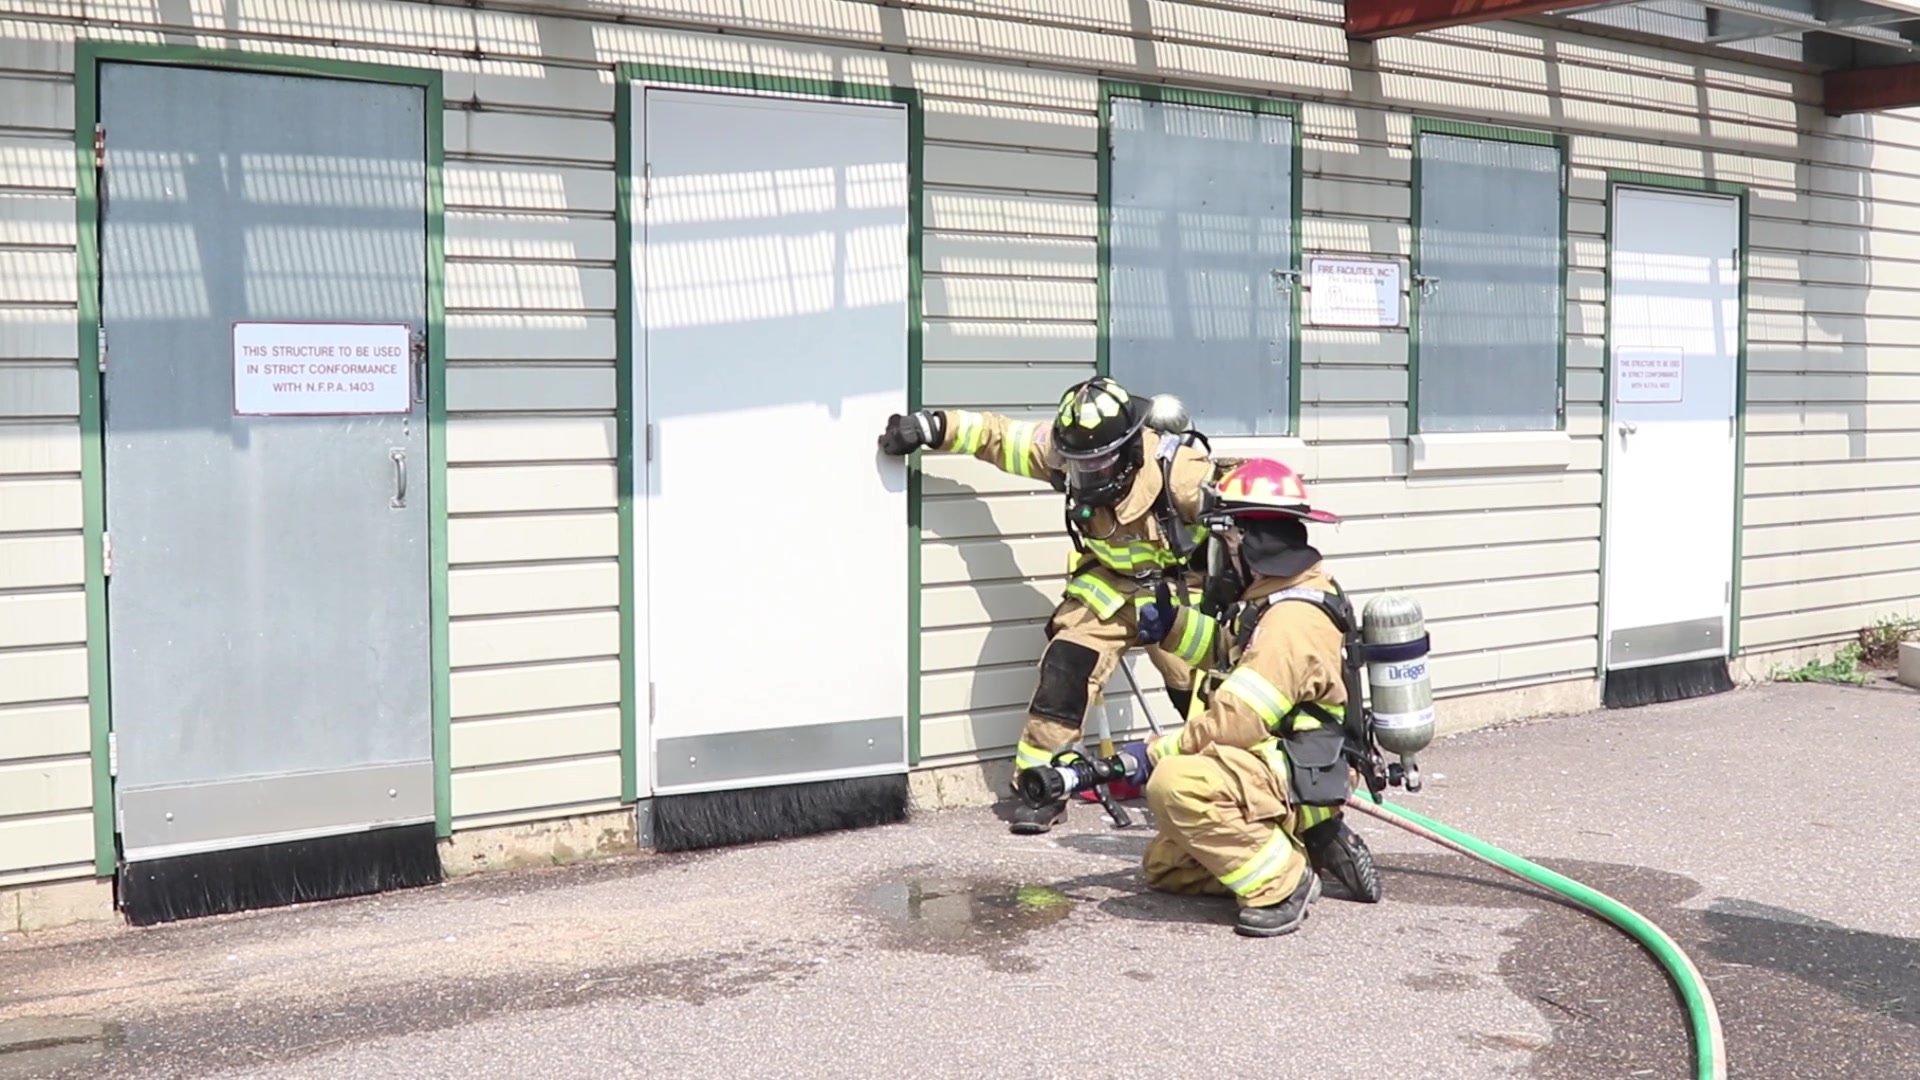 Army Reserve firefighters from the 467th Engineer Company (Firefighter Headquarters) conducted training at the Fort McCoy, Wis., Fire Department's Station #2, July 16, 2021.